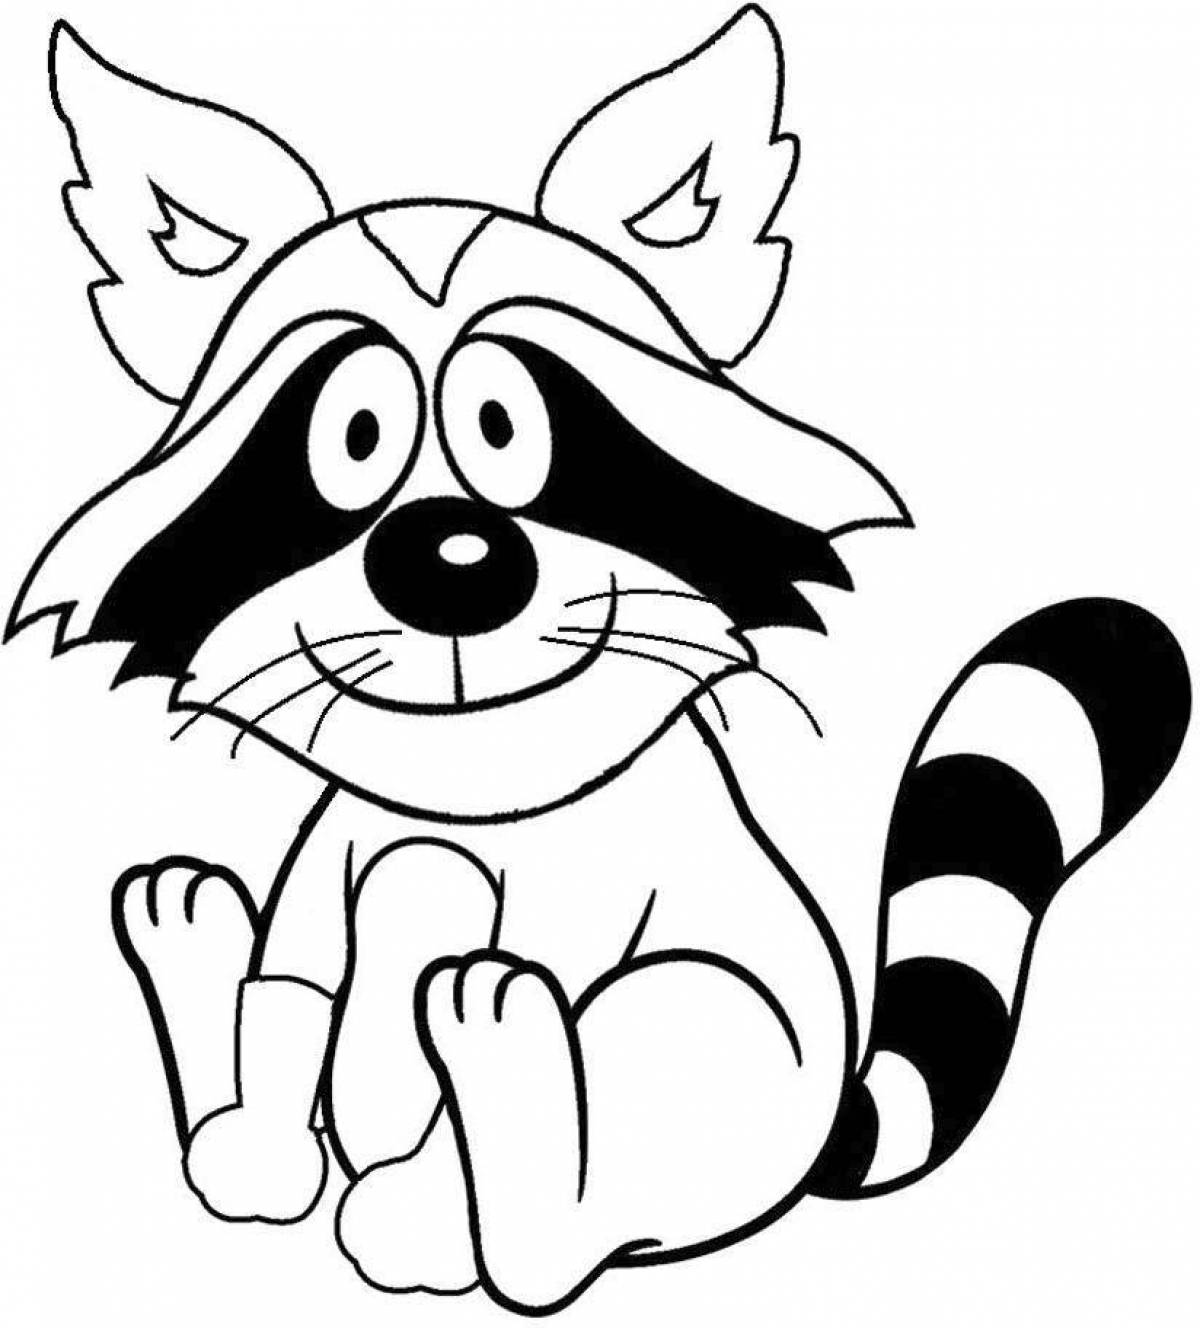 Coloring book playful raccoon for kids